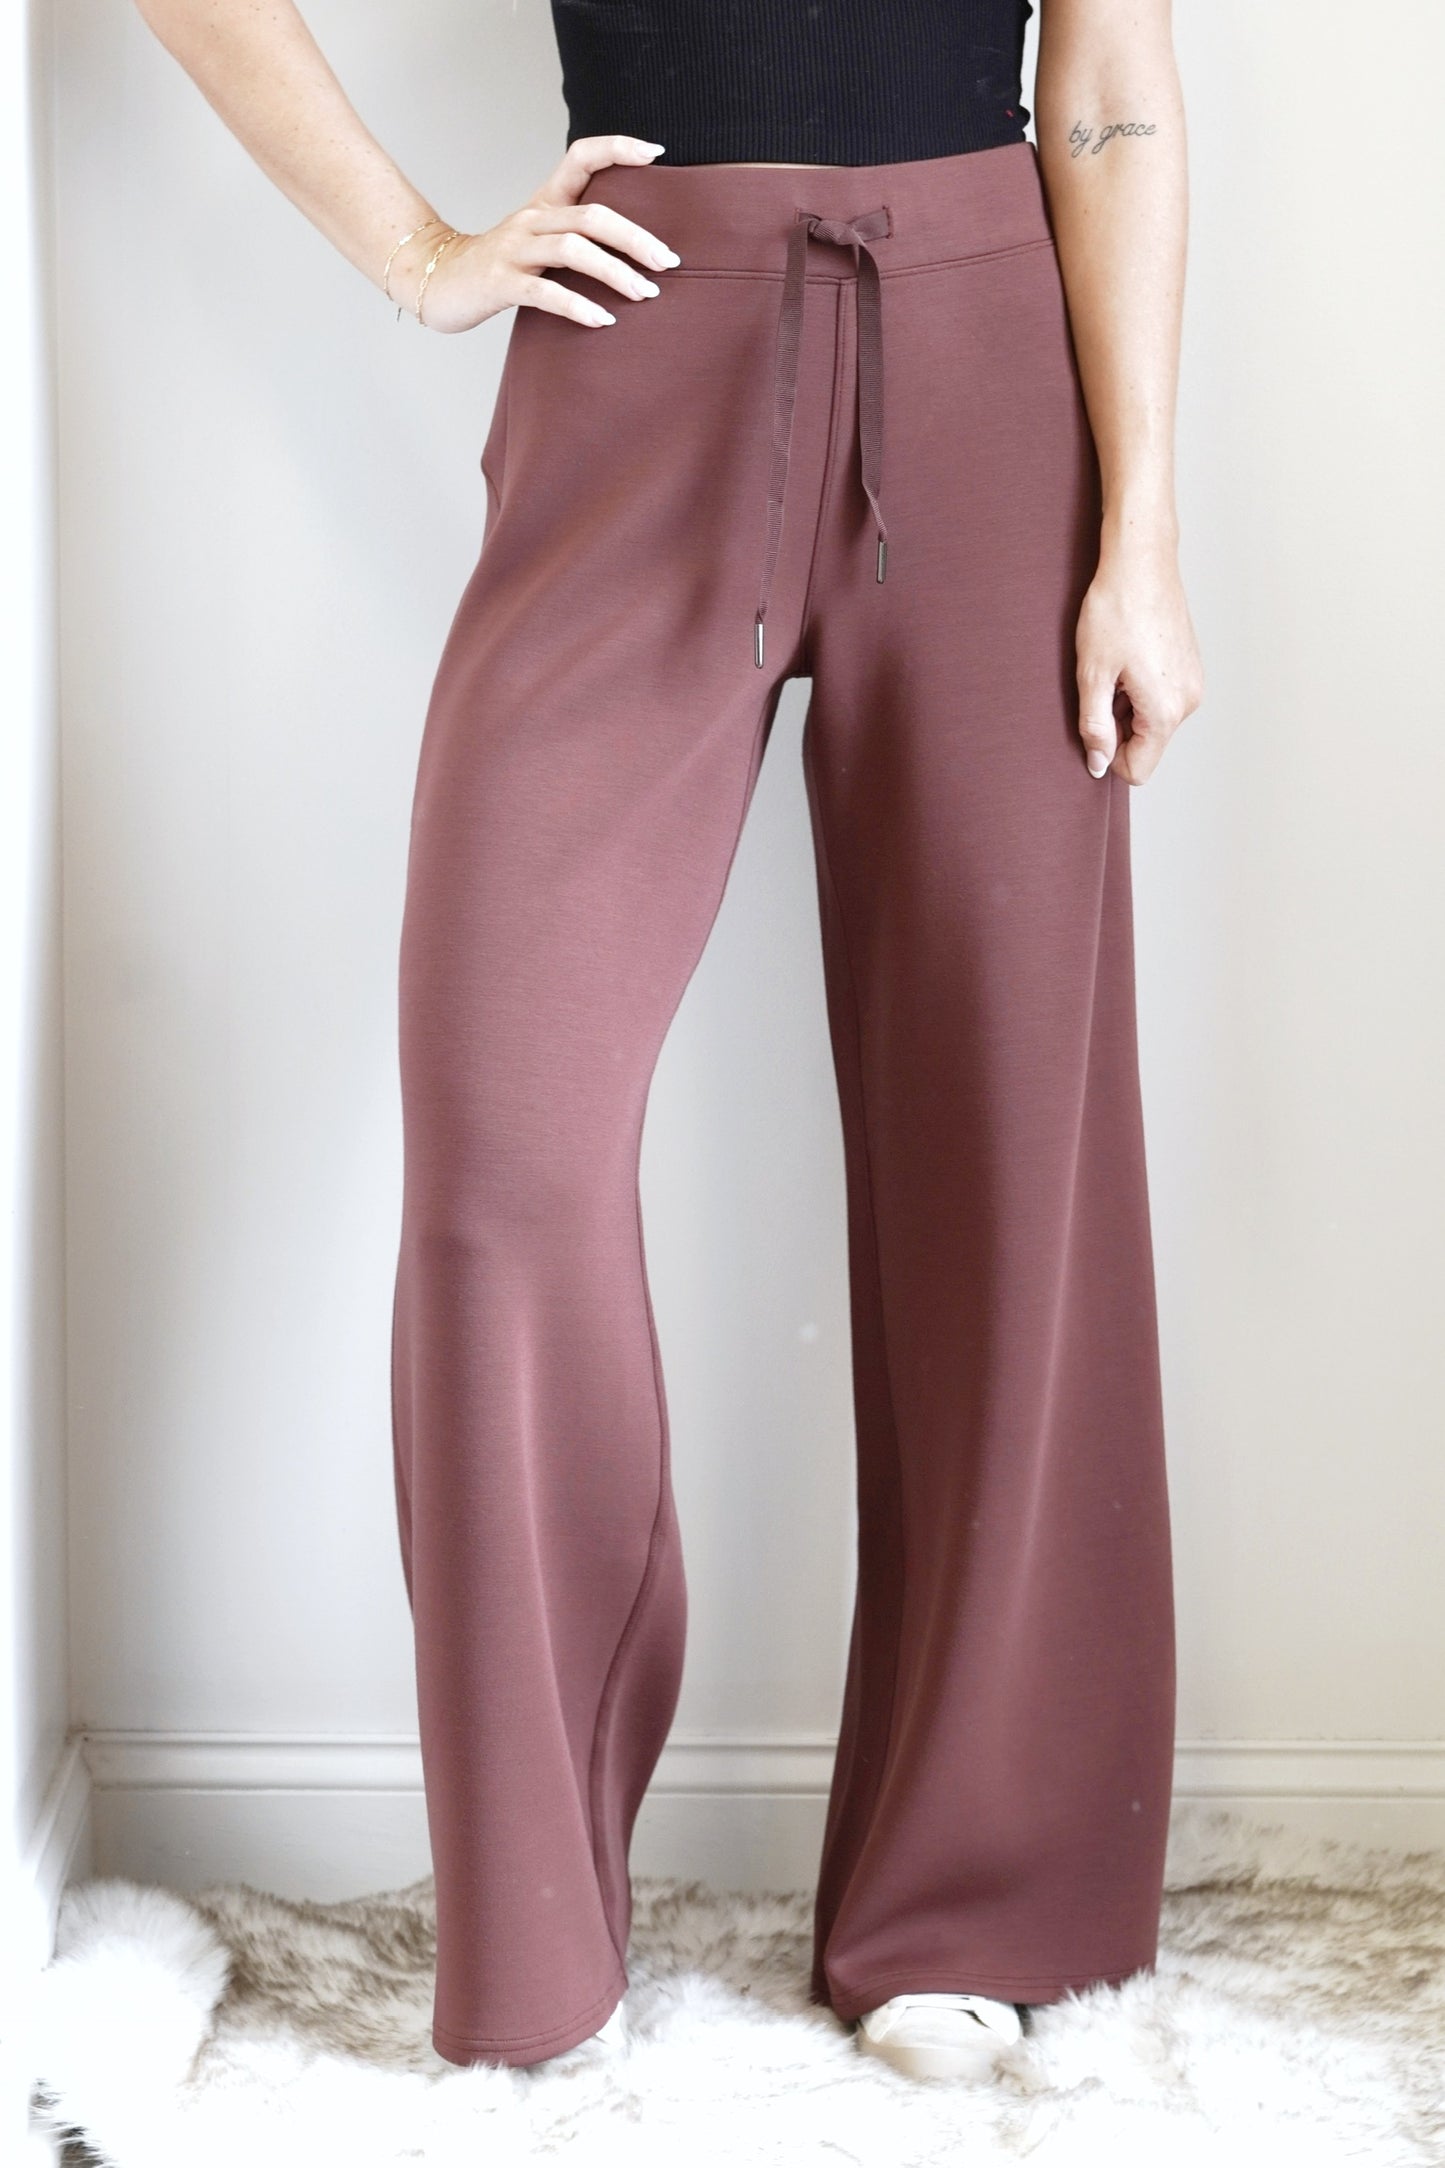 Spanx AirEssentials Wide Leg Sweatpants Drawstring Elastic Waistband Wide Legs Mid-Rise Full Length Relaxed fit with leg-lengthening wide leg Colors: Spice 47% Modal, 46% Polyester, 7% Elastane